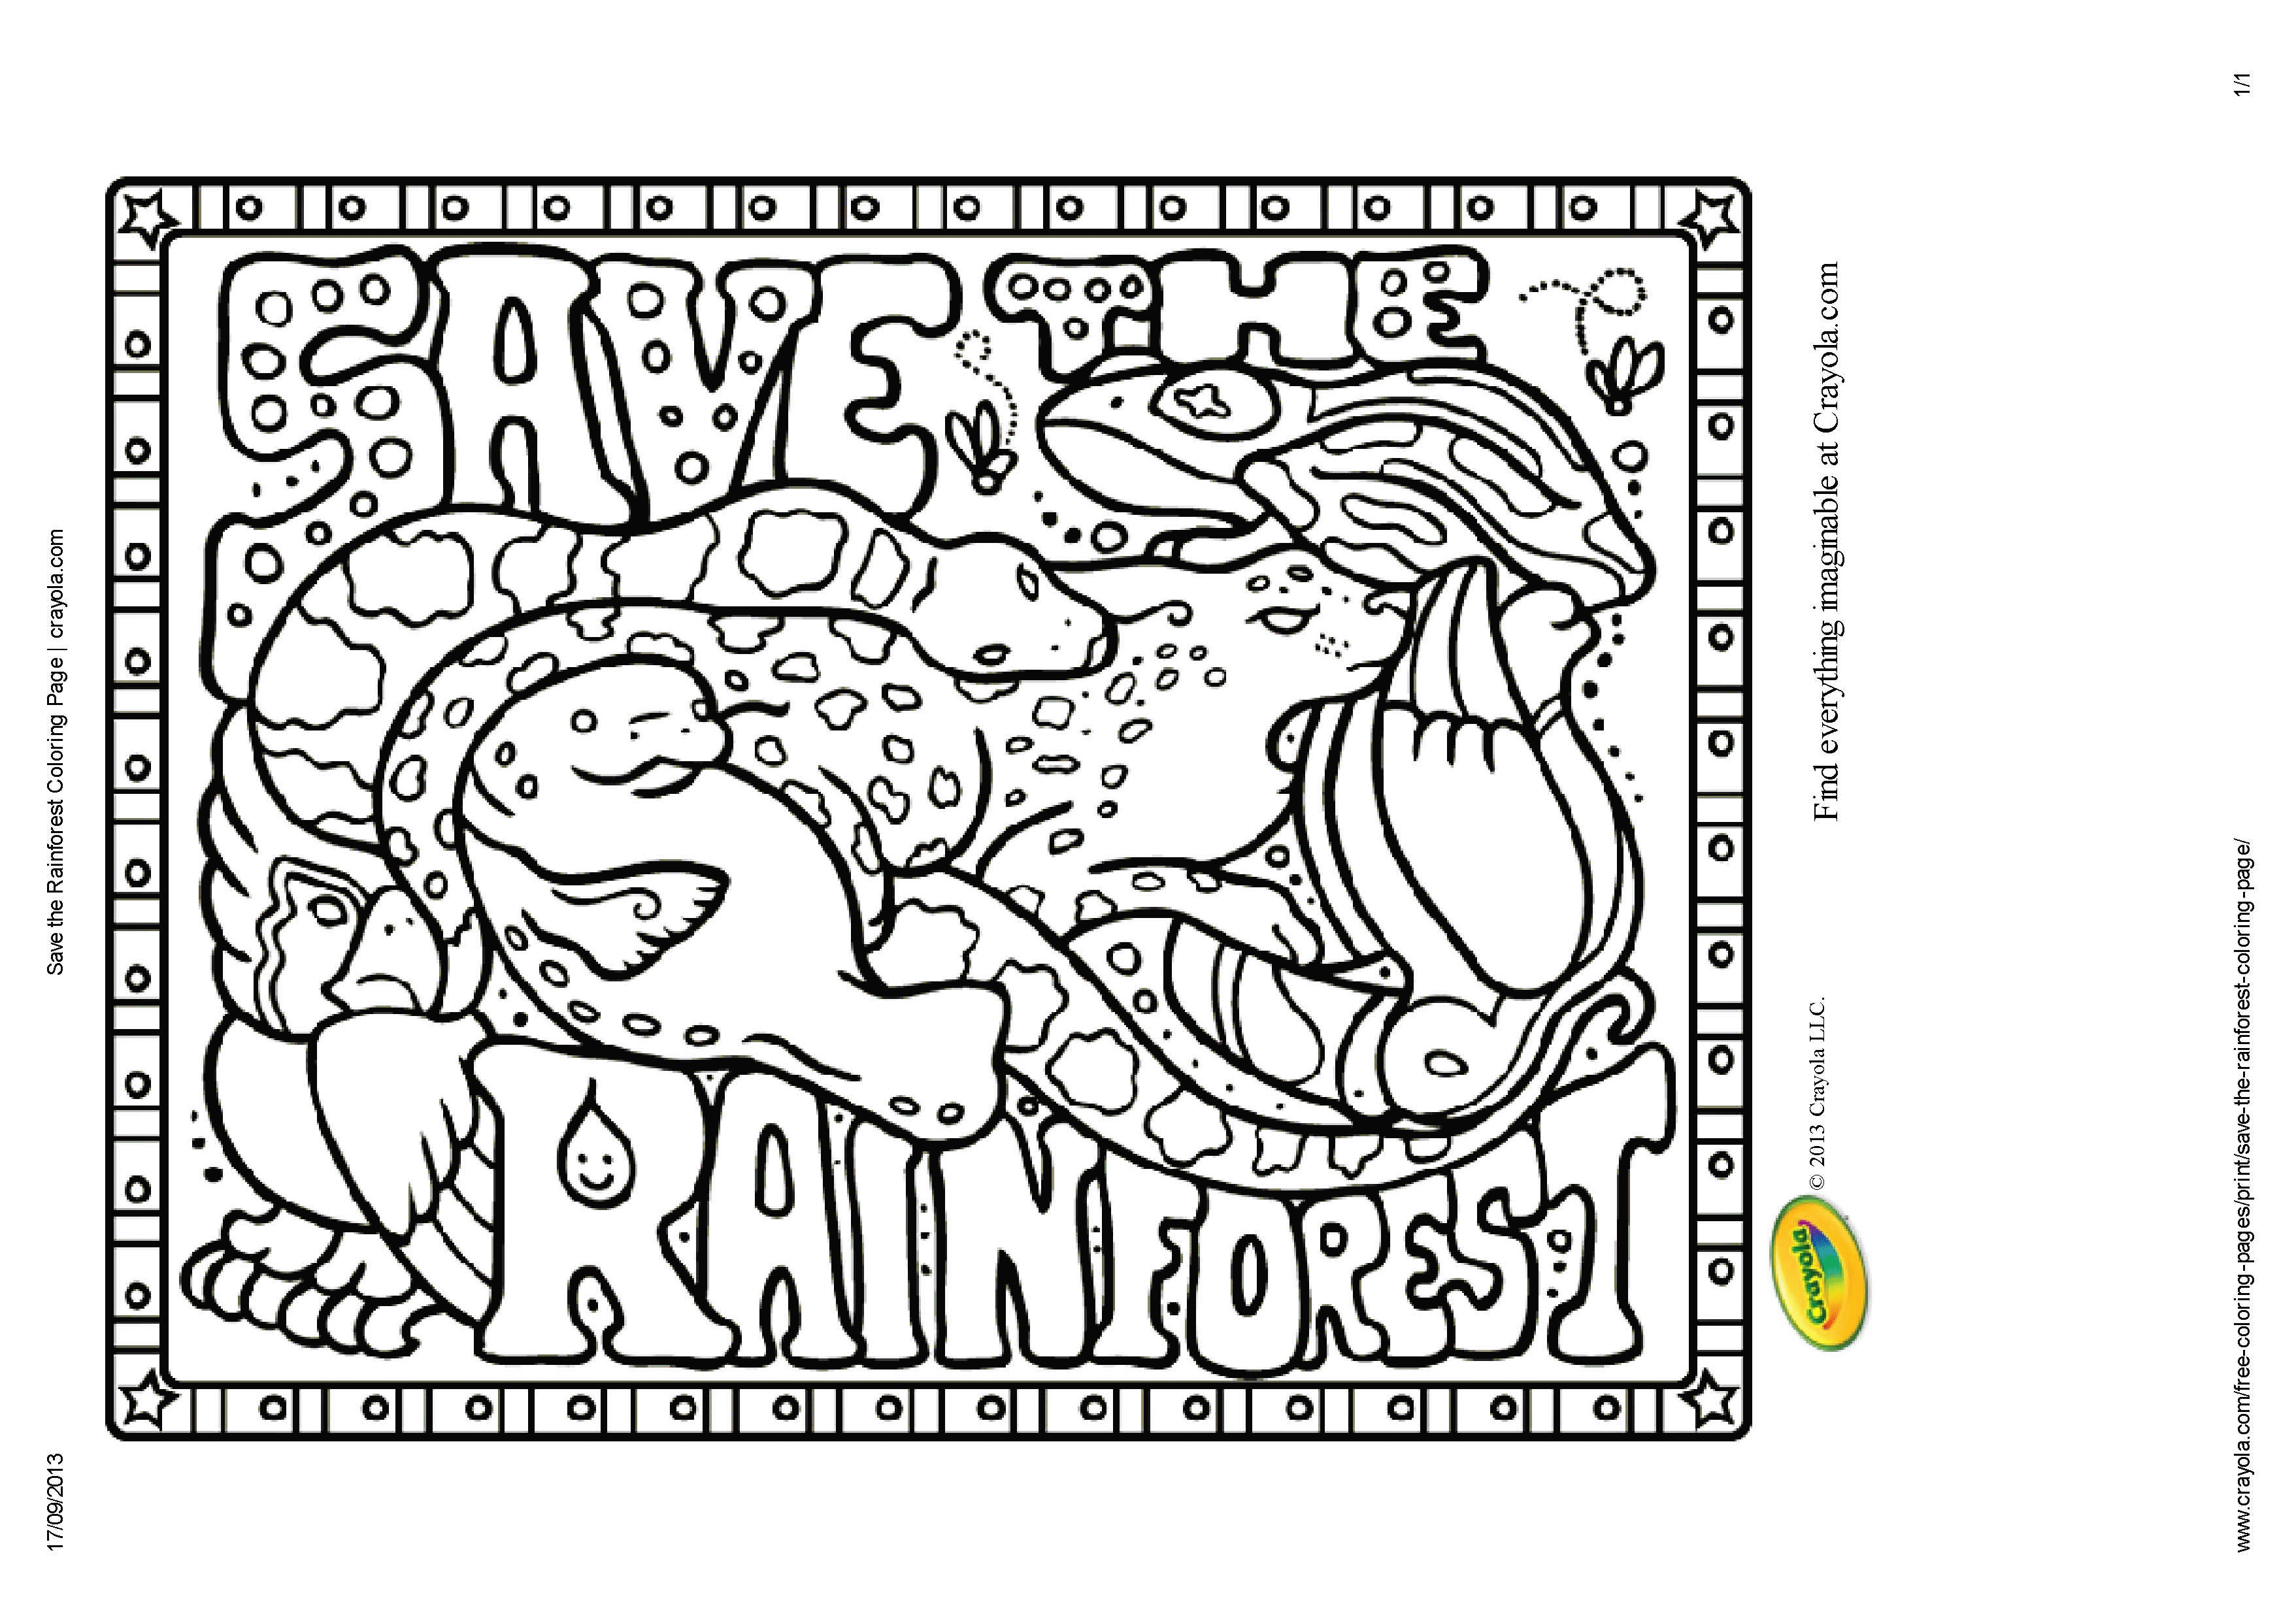 Tropical Coloring Pages To Print Coloring Pages